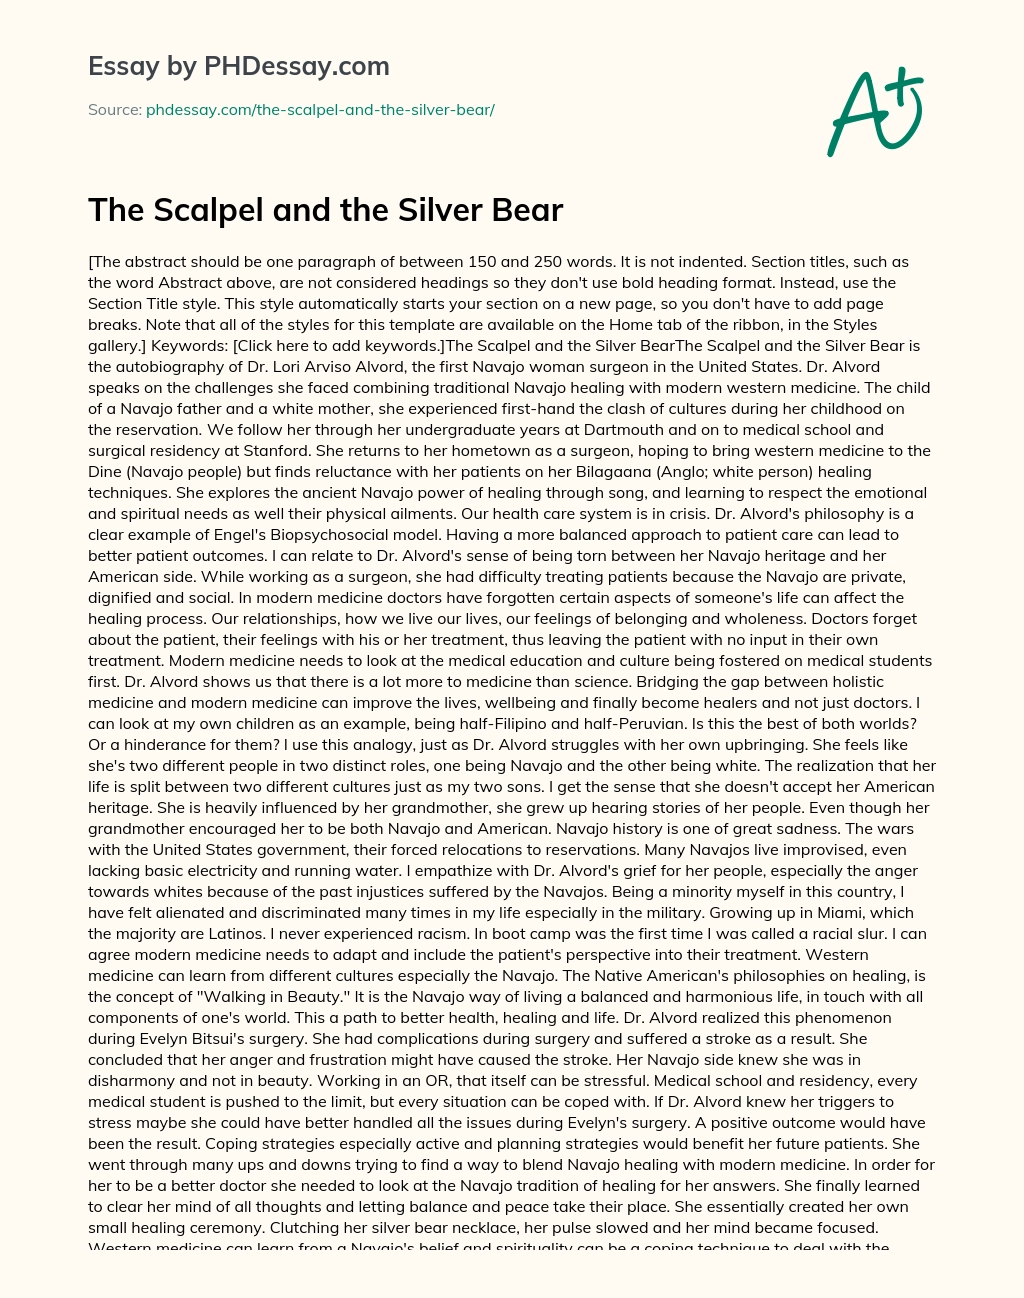 The Scalpel and the Silver Bear essay